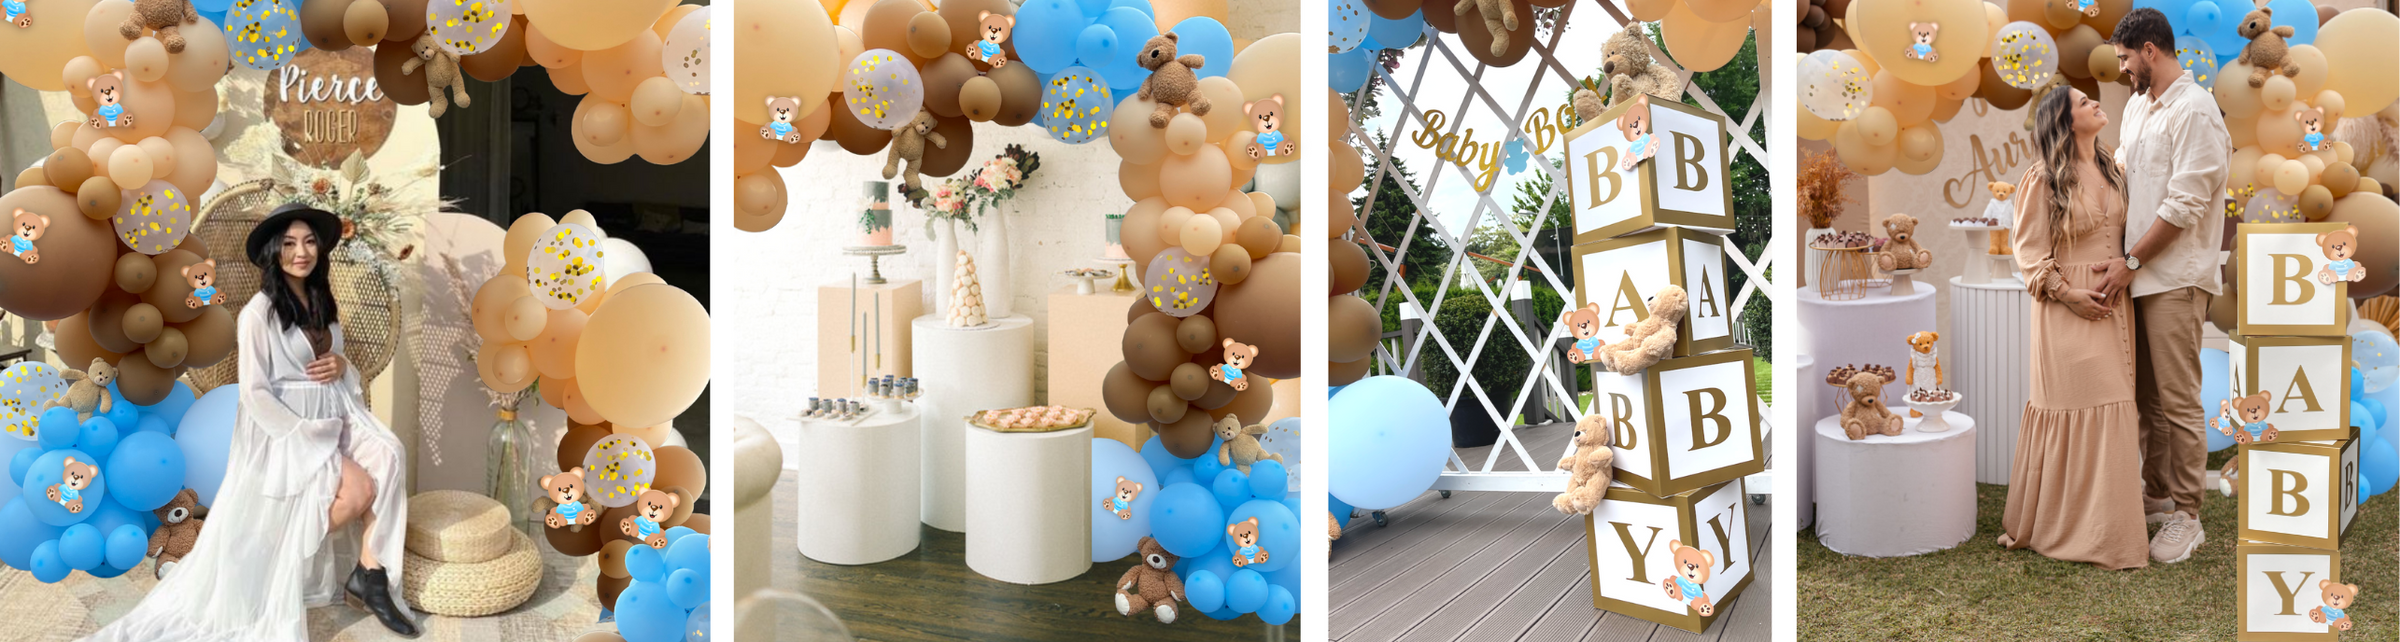 Hosting a Teddy Bear Baby Shower: 12 Tips for Planning & Organizing